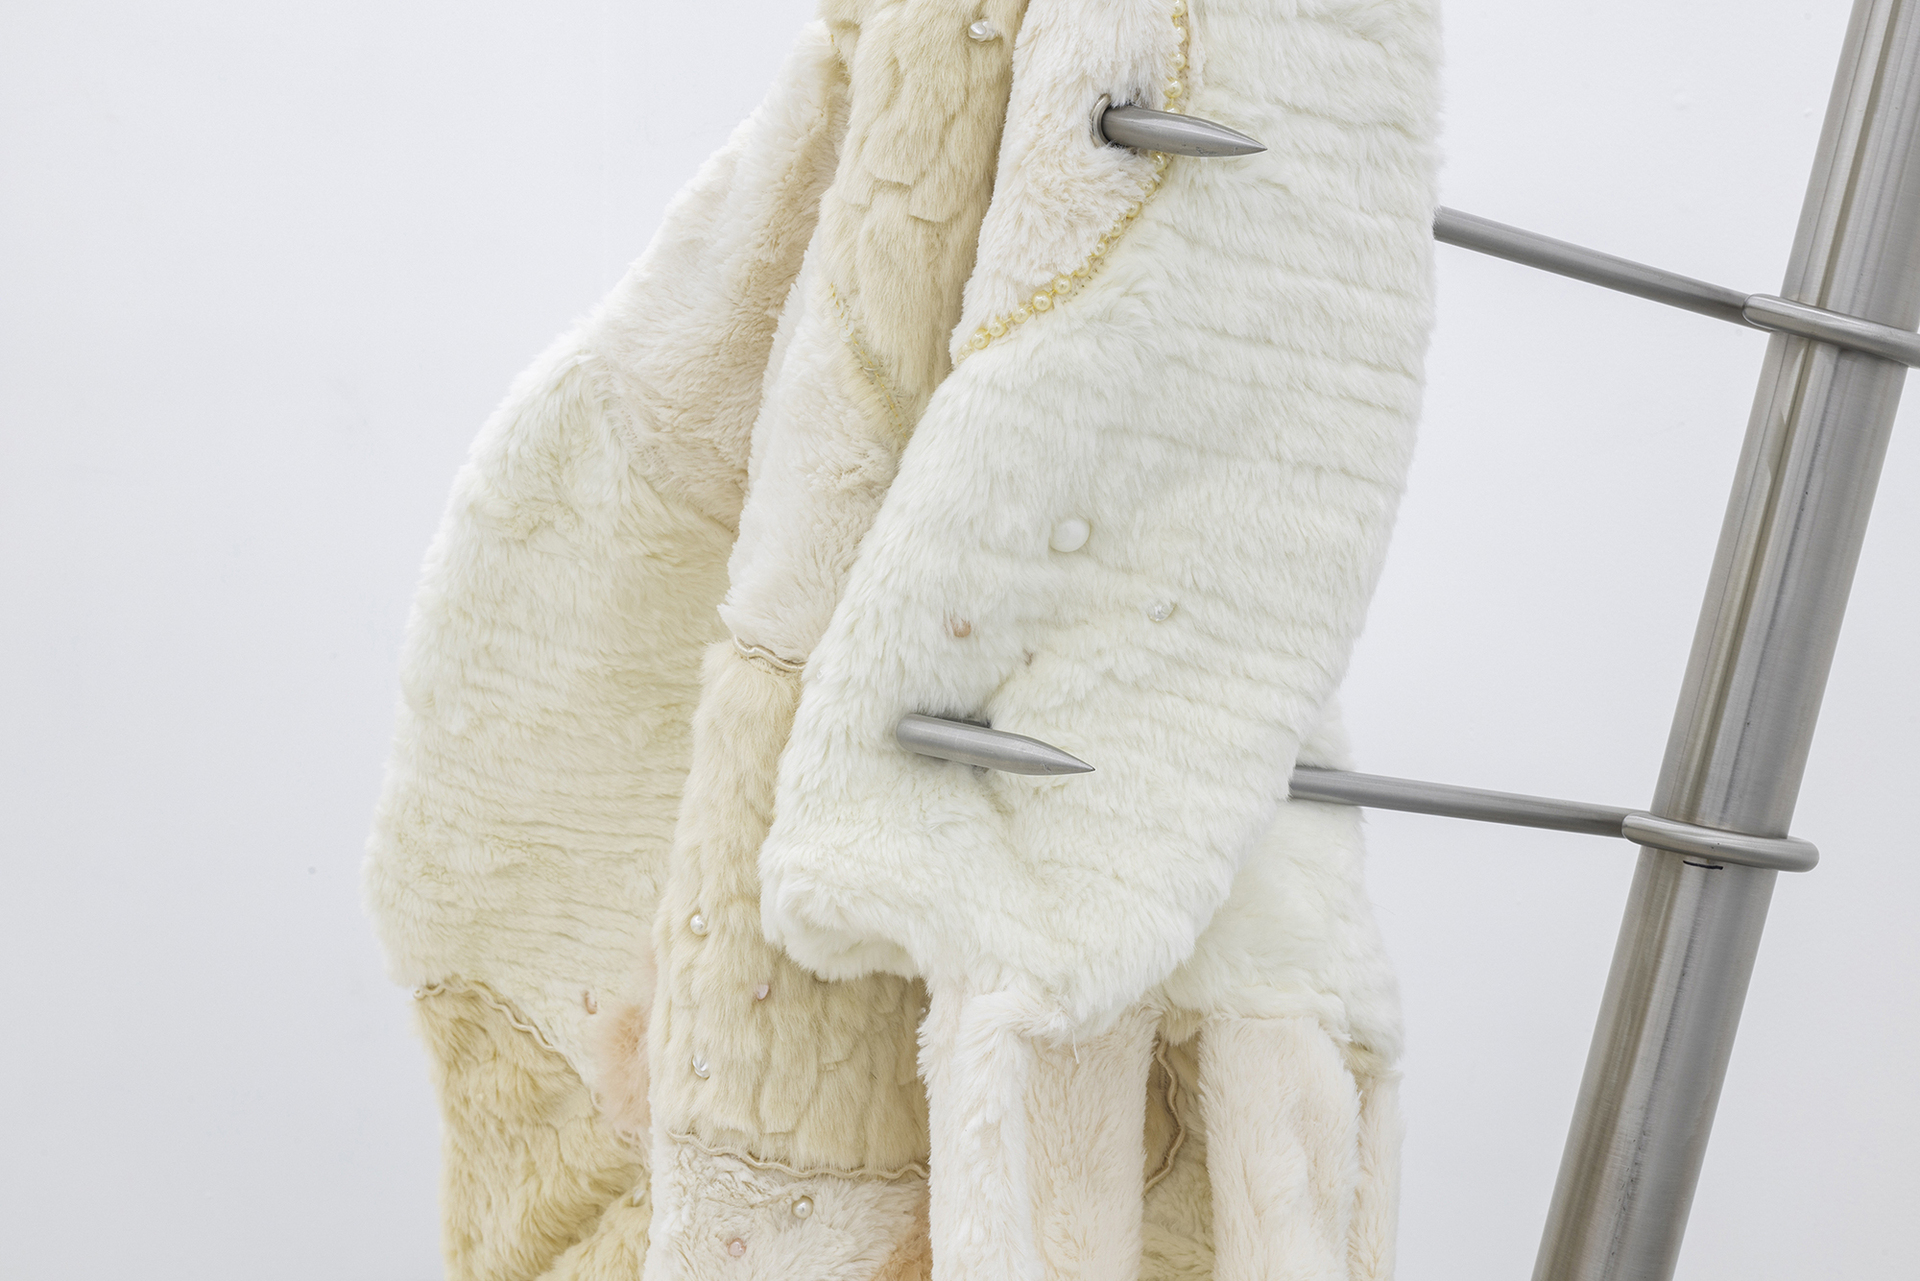 Kate Bohunnis, a healthy distance (part 1), 2021-2022, stainless steel, faux fur, beads, faux pearls rope, cotton, 153 x 326 x 153 cm / 60 3/8 x 128 5/16 x 60 3/8 inches